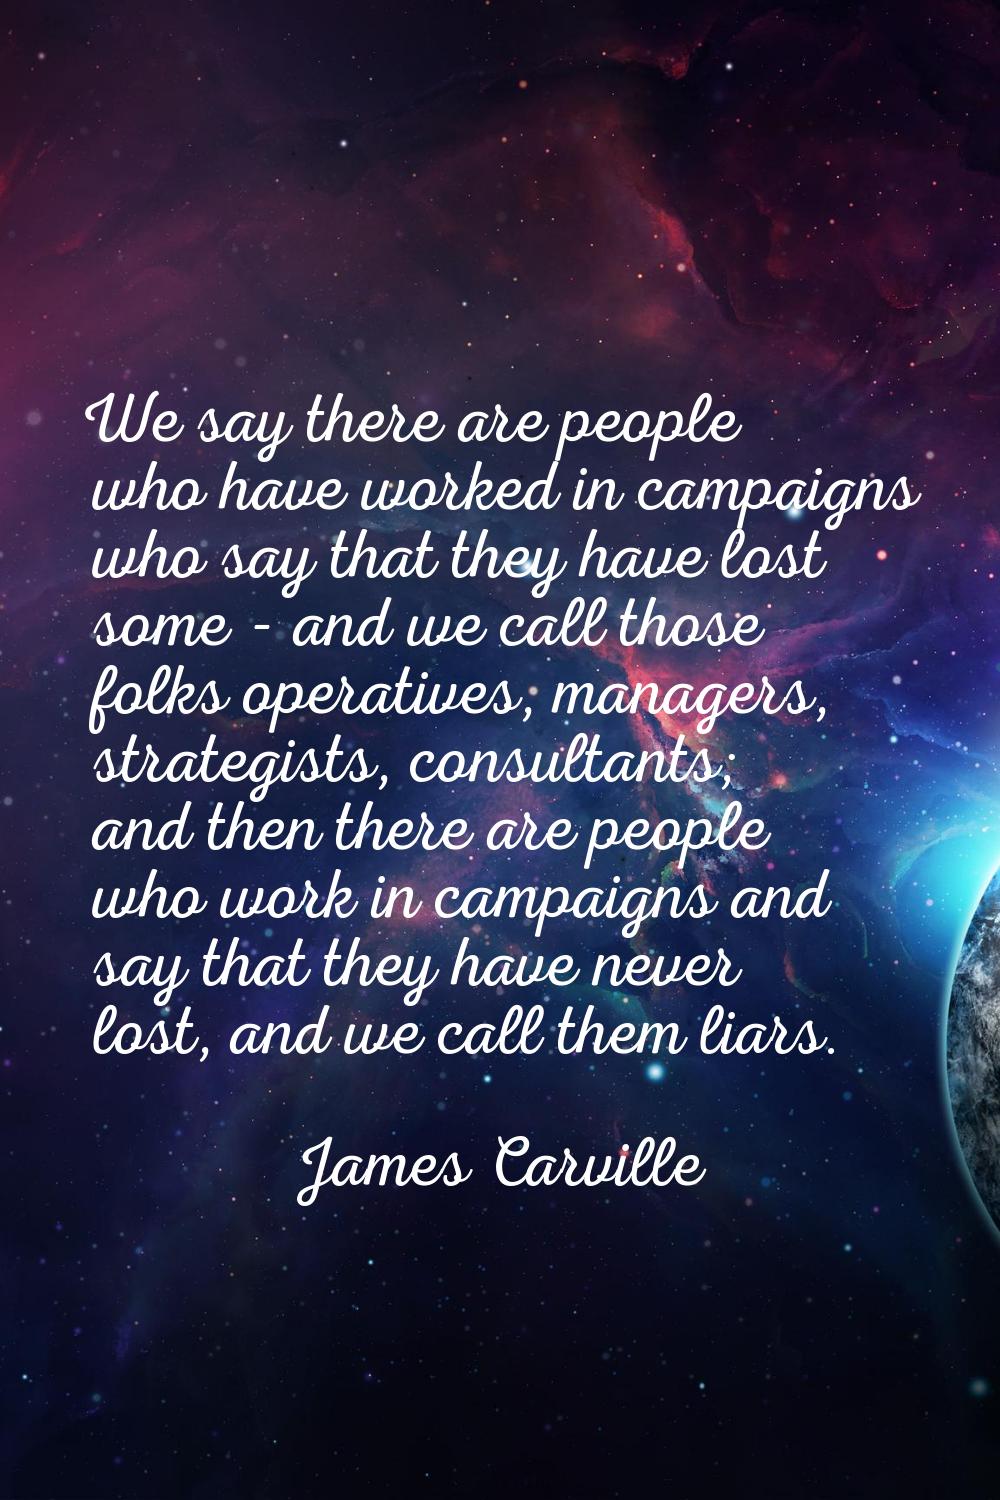 We say there are people who have worked in campaigns who say that they have lost some - and we call